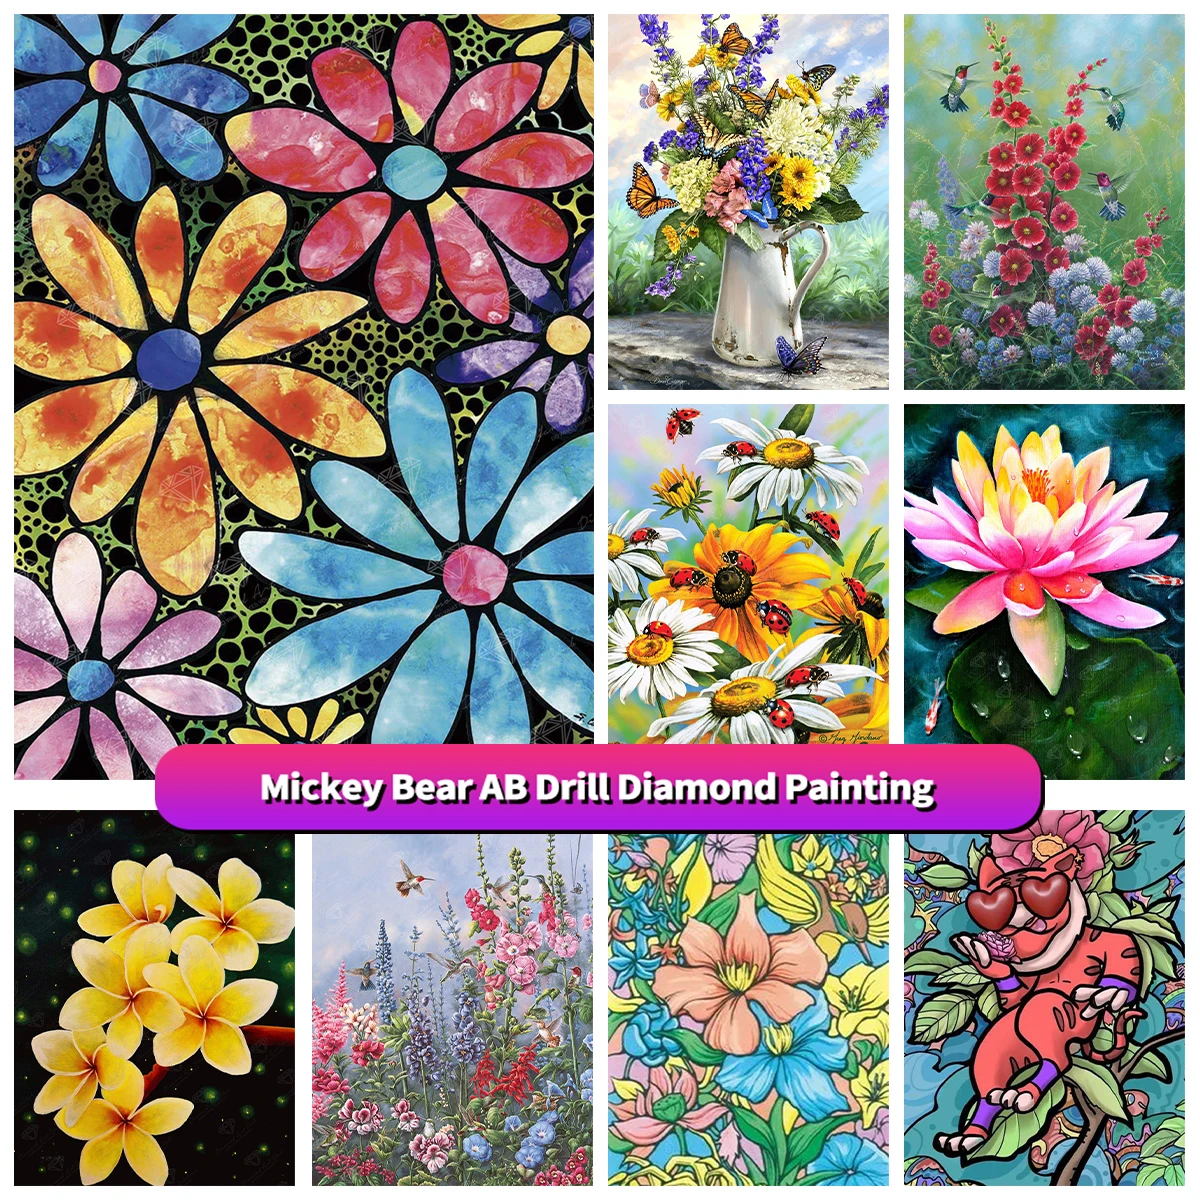 

DIY AB Diamond Painting Kit Flowers Rose Peony Lotus Art Picture Full Round Square Drill Embroidery Mosaic Home Decor Gift